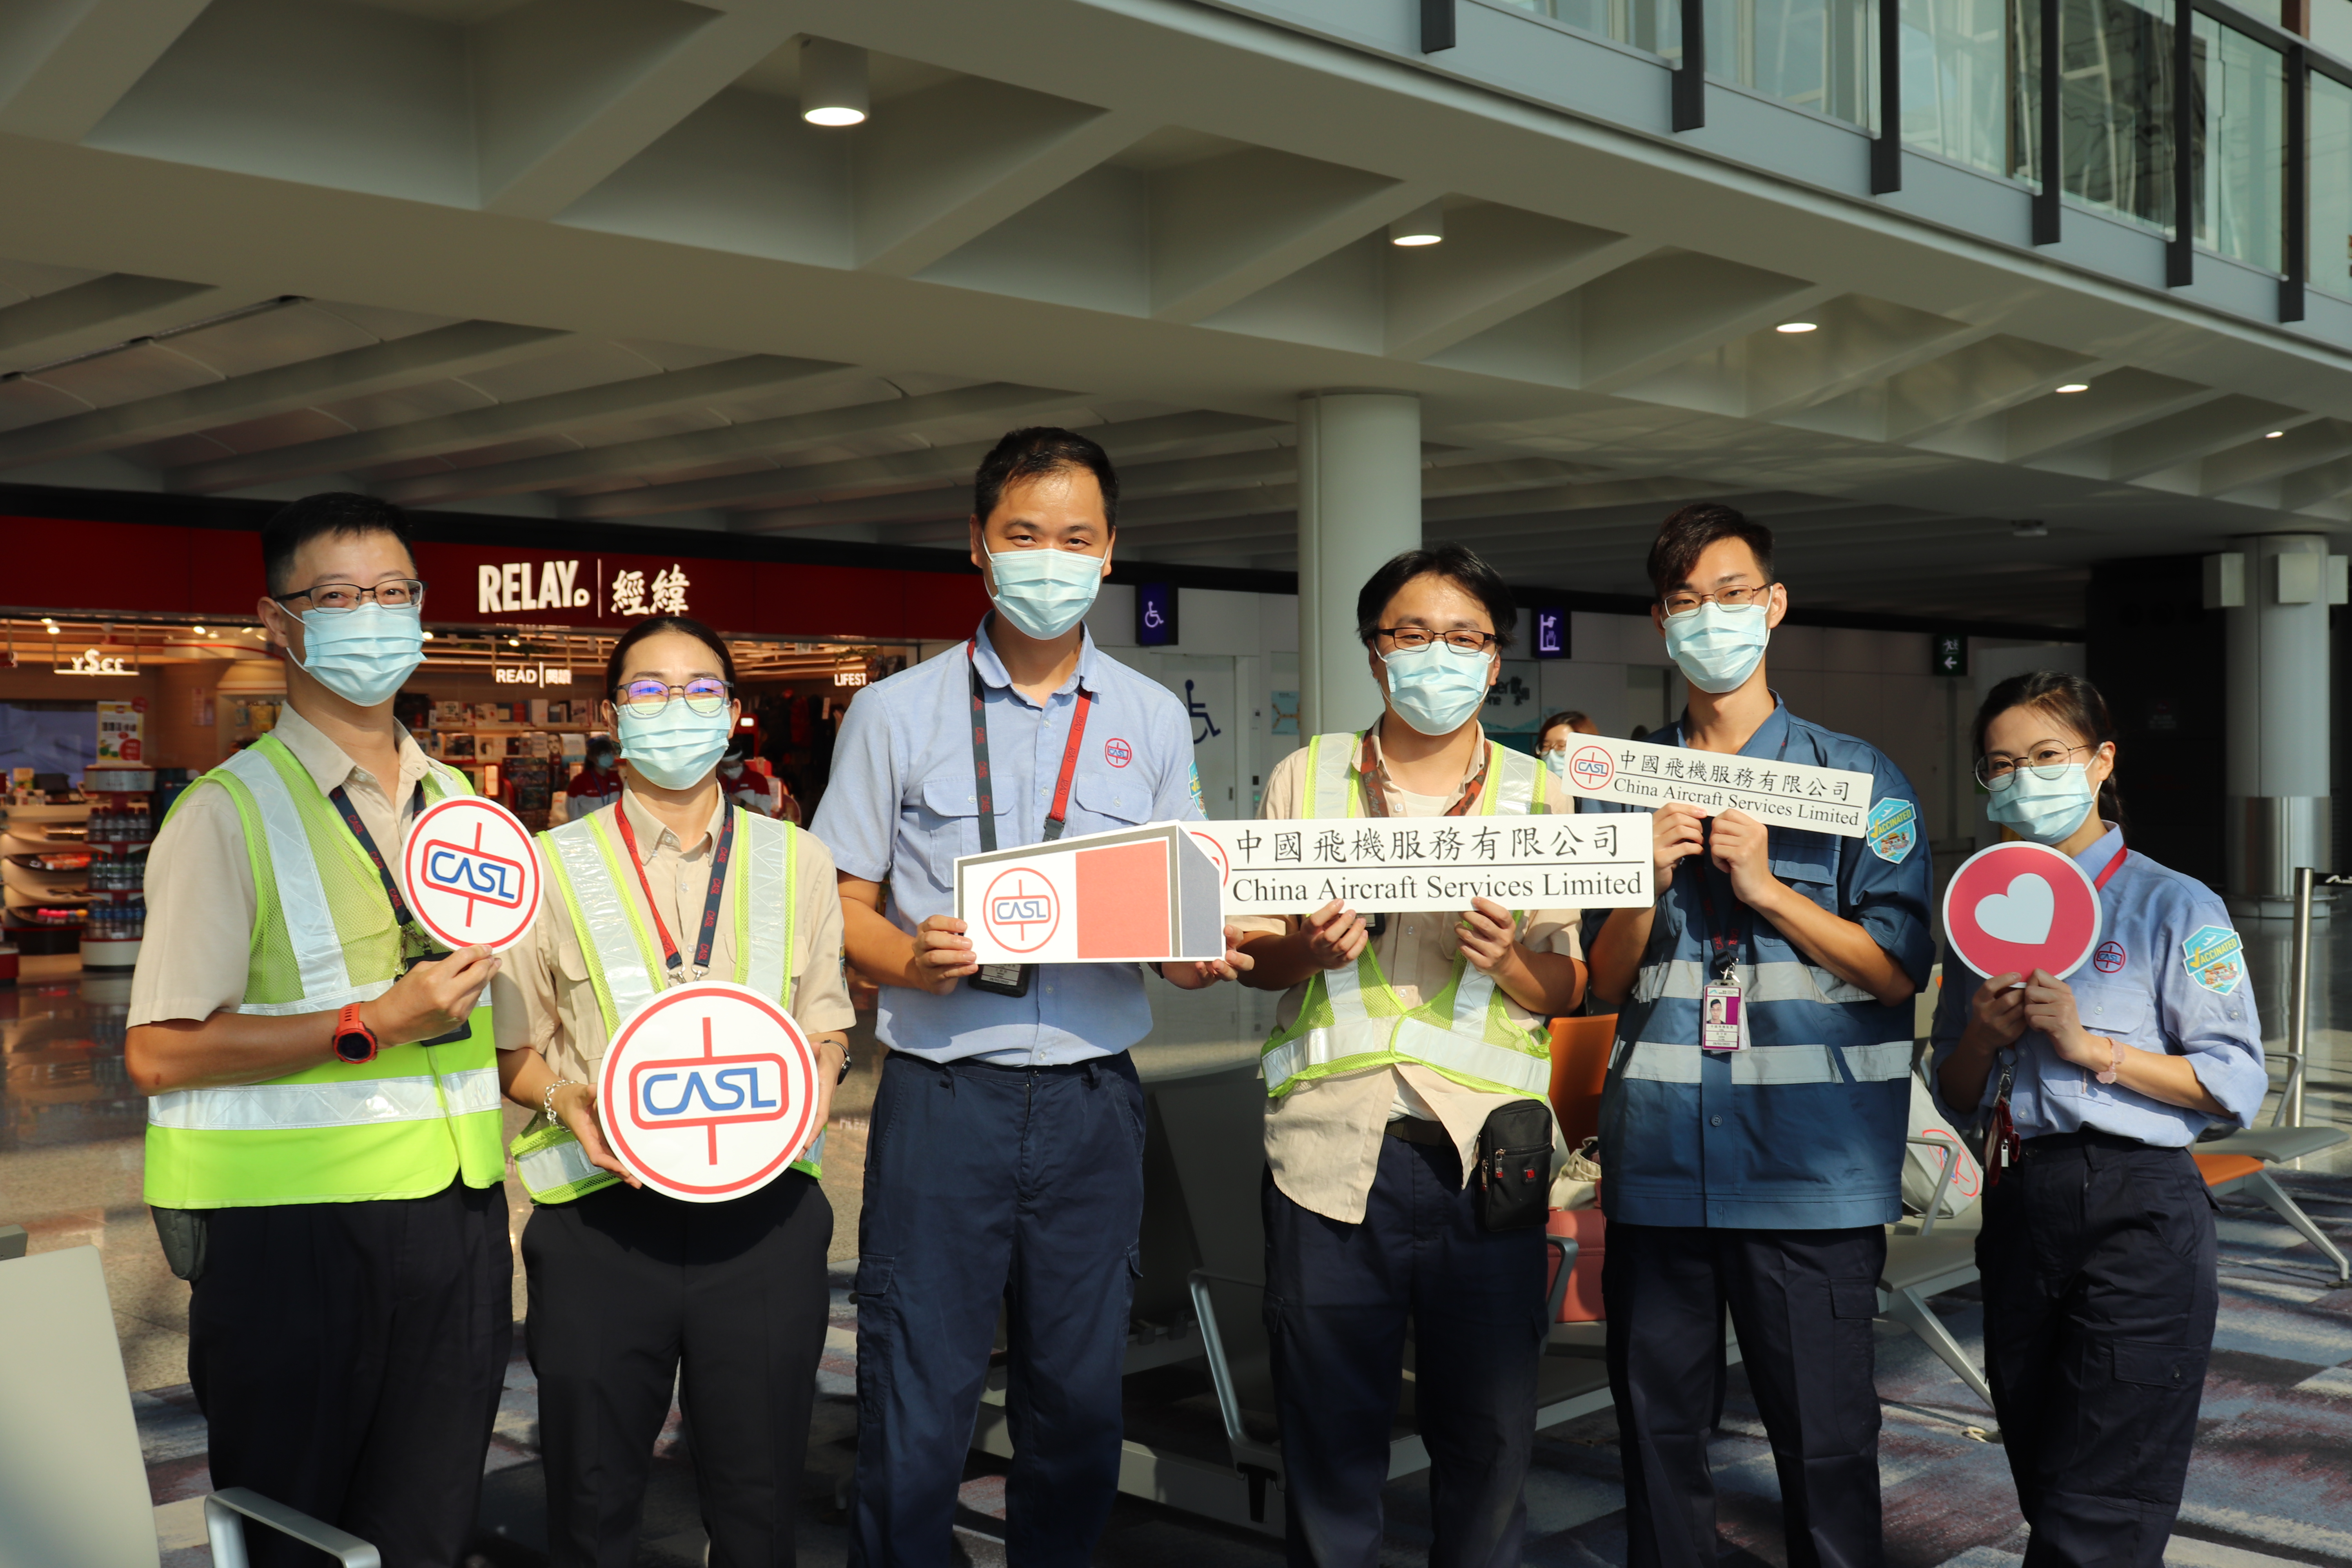 CASL staff joins airport’s vaccination video shooting